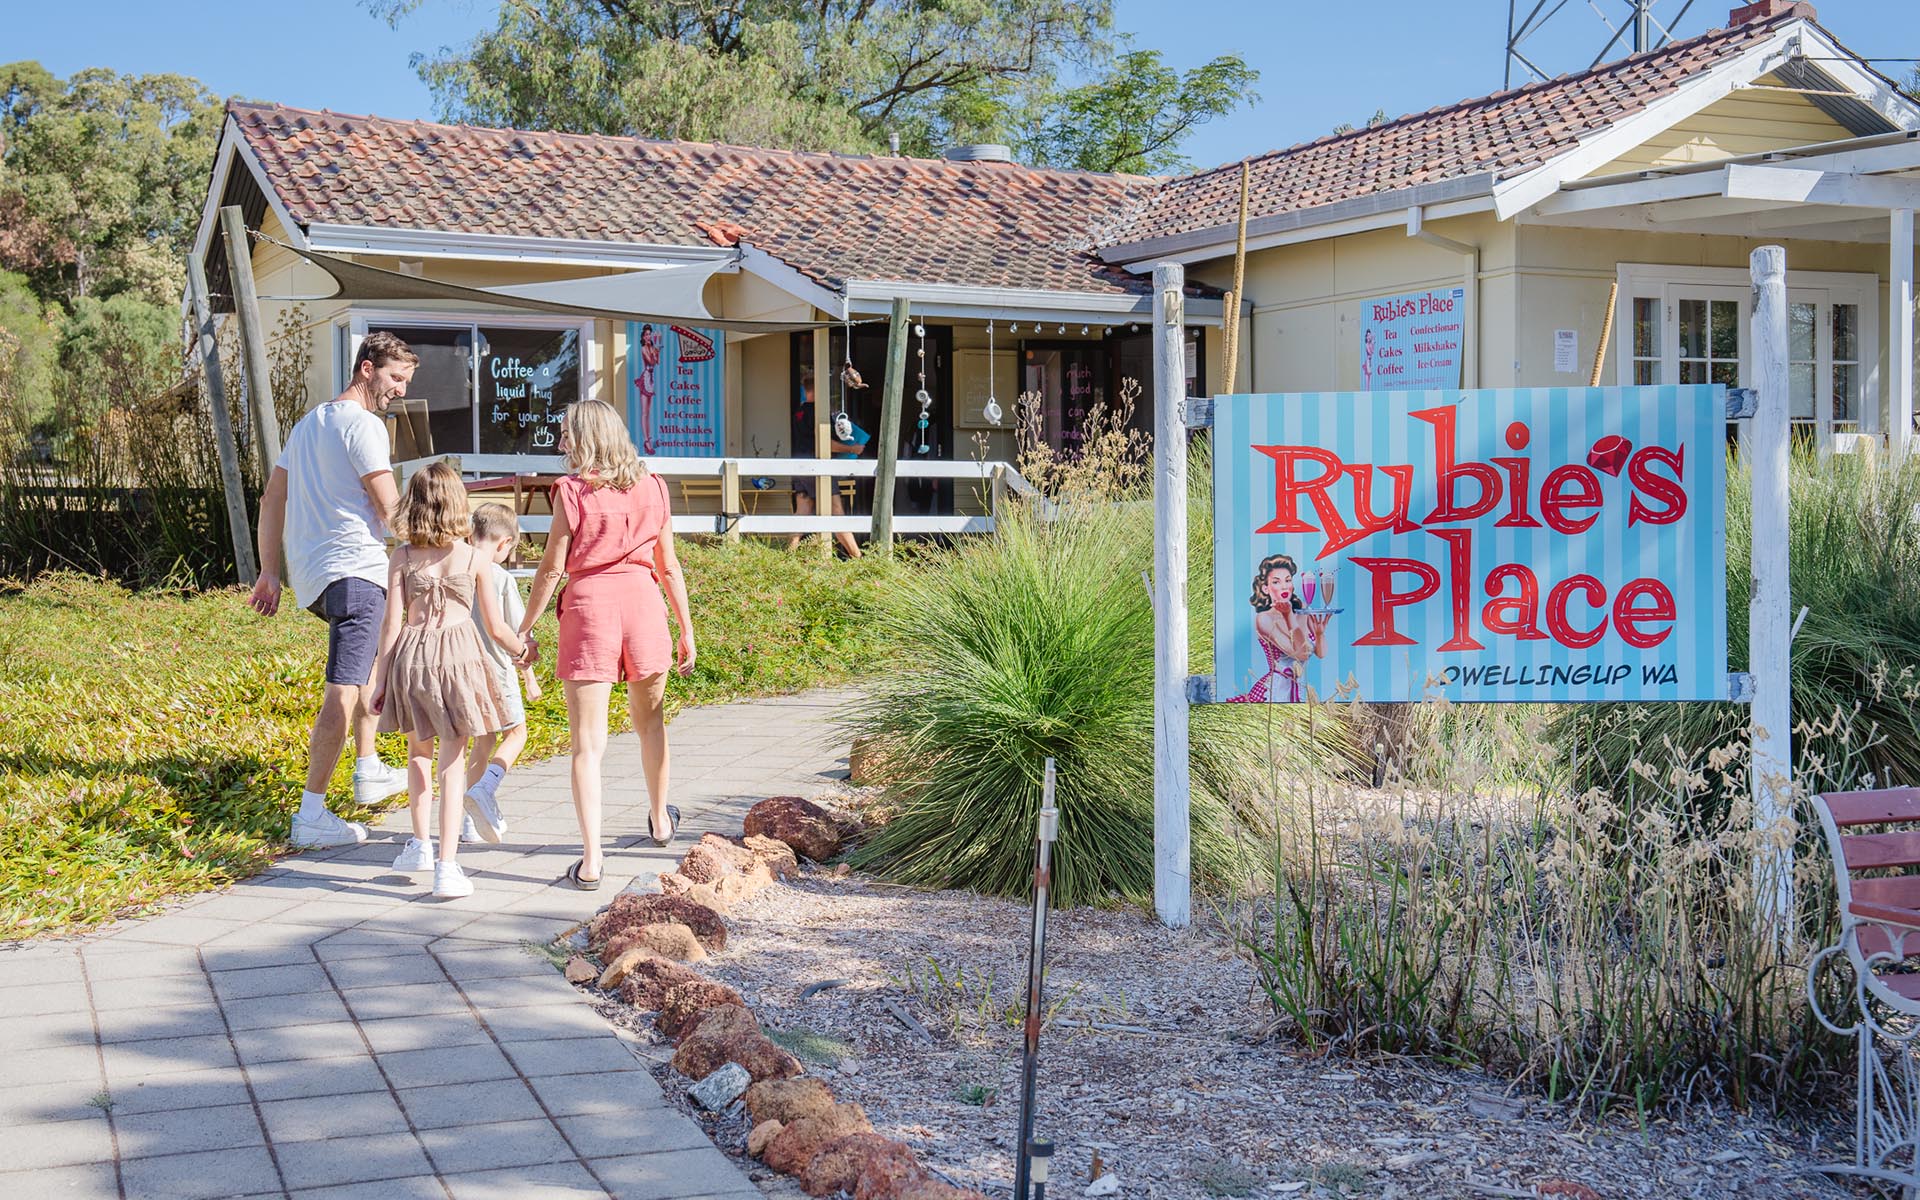 Rubies Place ice-cream store and cafe in Dwellingup, Western Australia